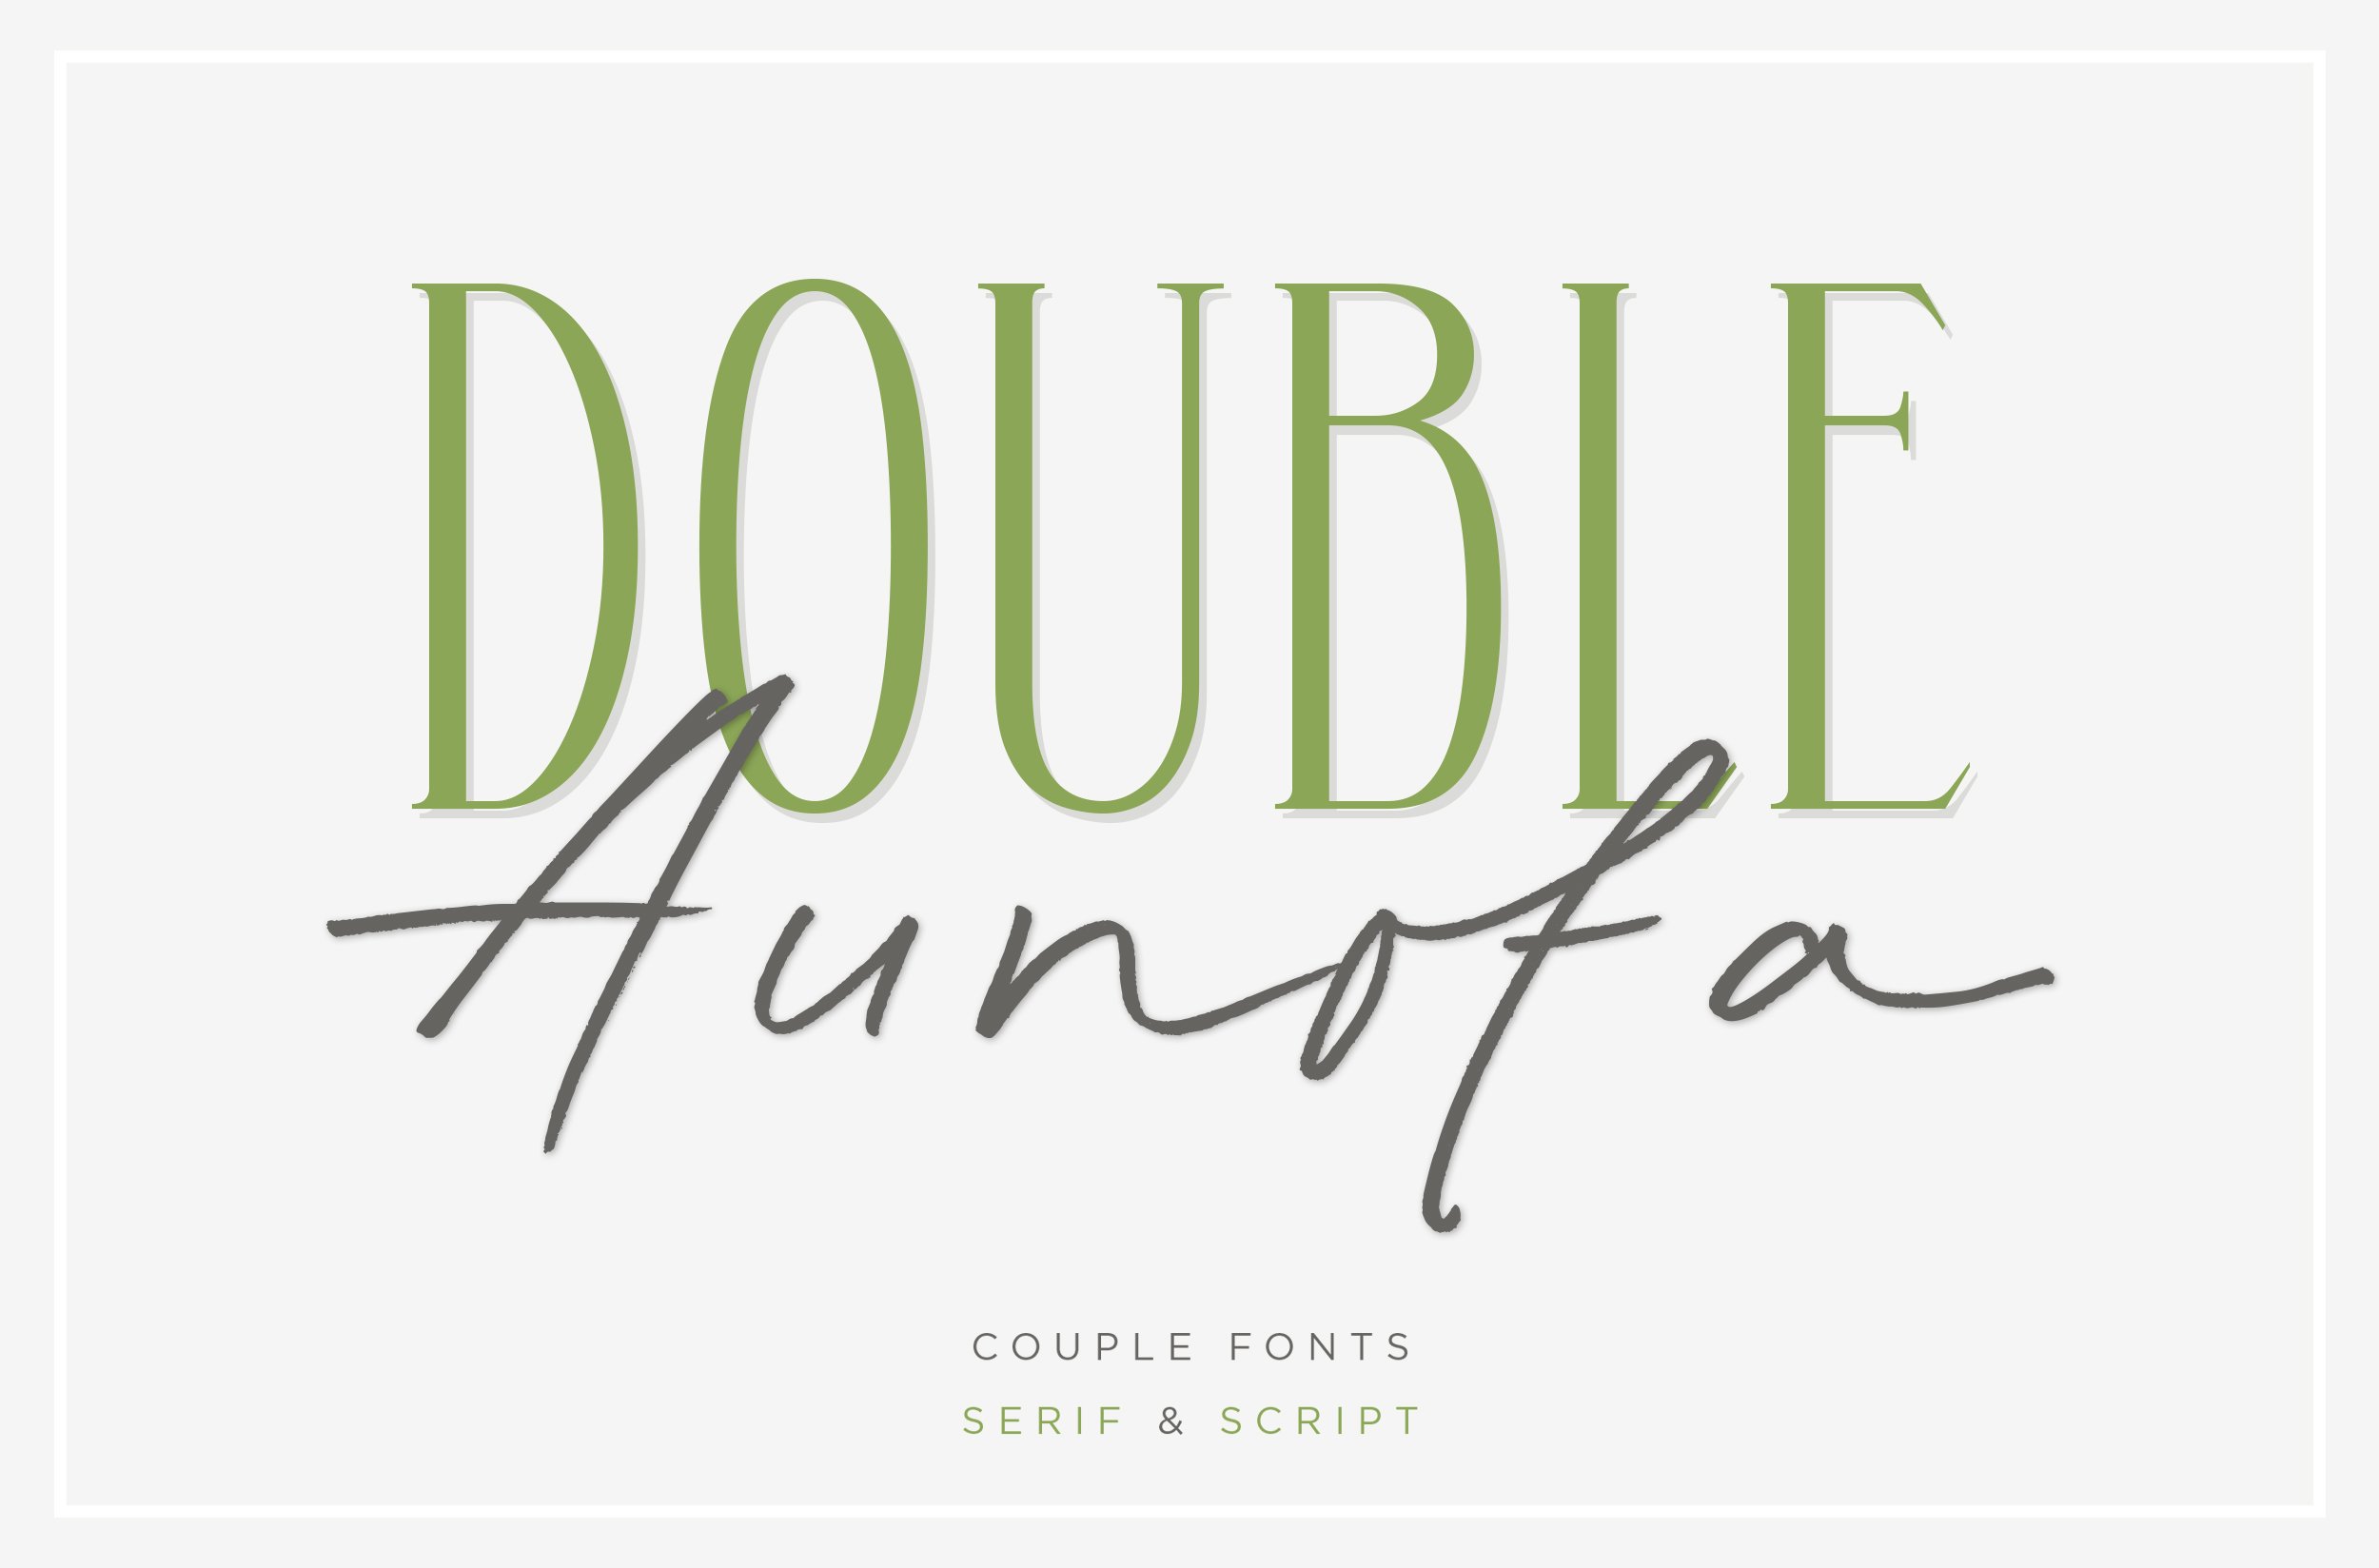 Double Aunofa - Couple Font cover image.